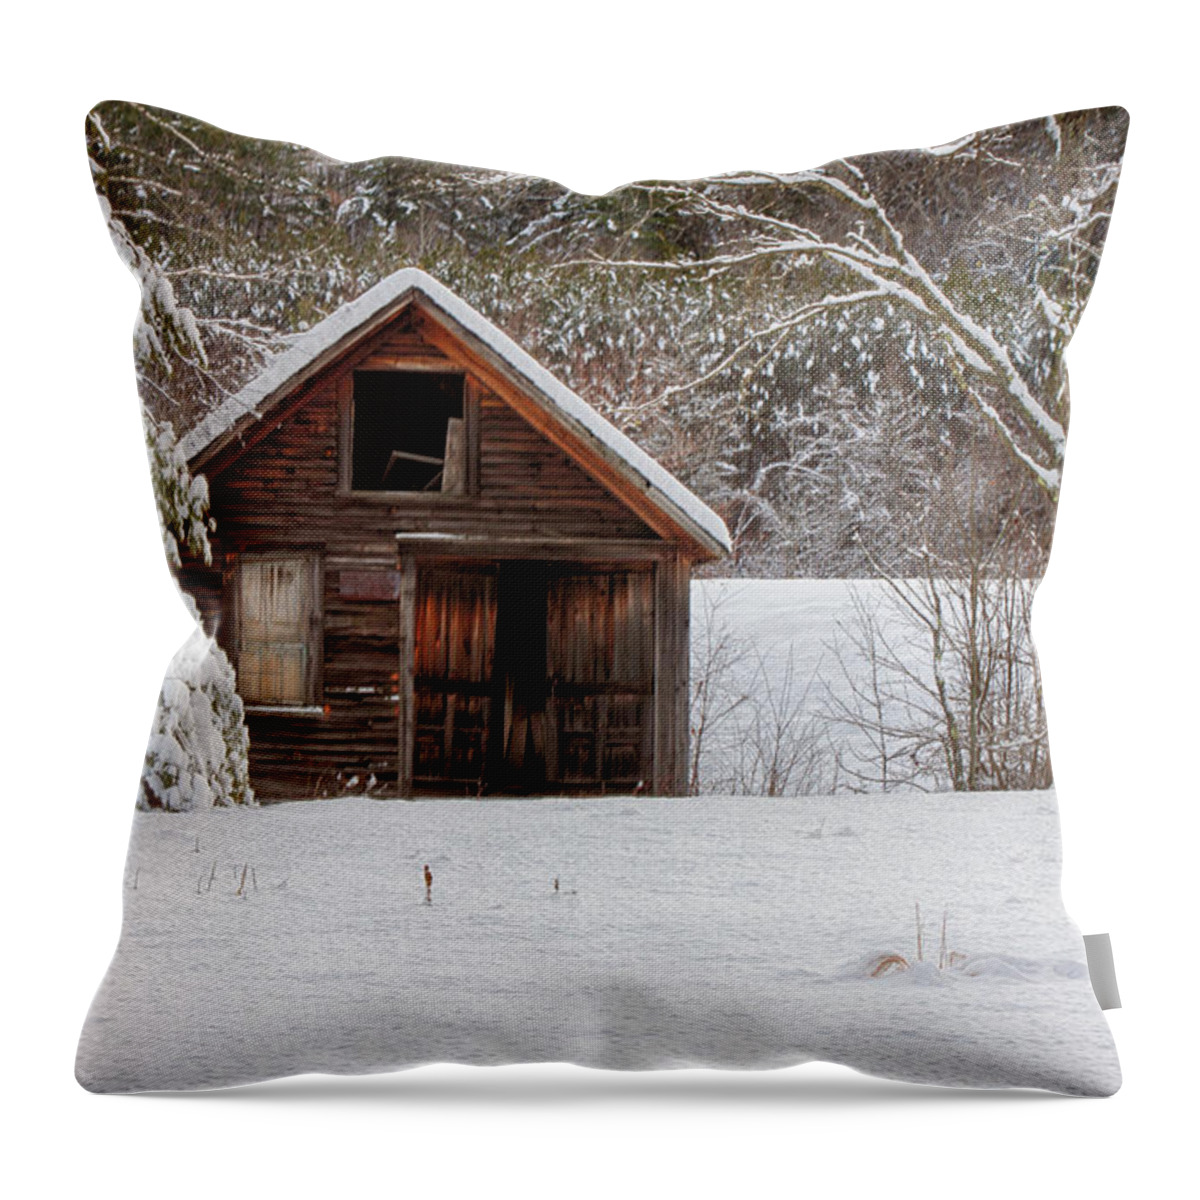  Scenic Vermont Photographs Throw Pillow featuring the photograph Rustic Shack In Snow by Jeff Folger